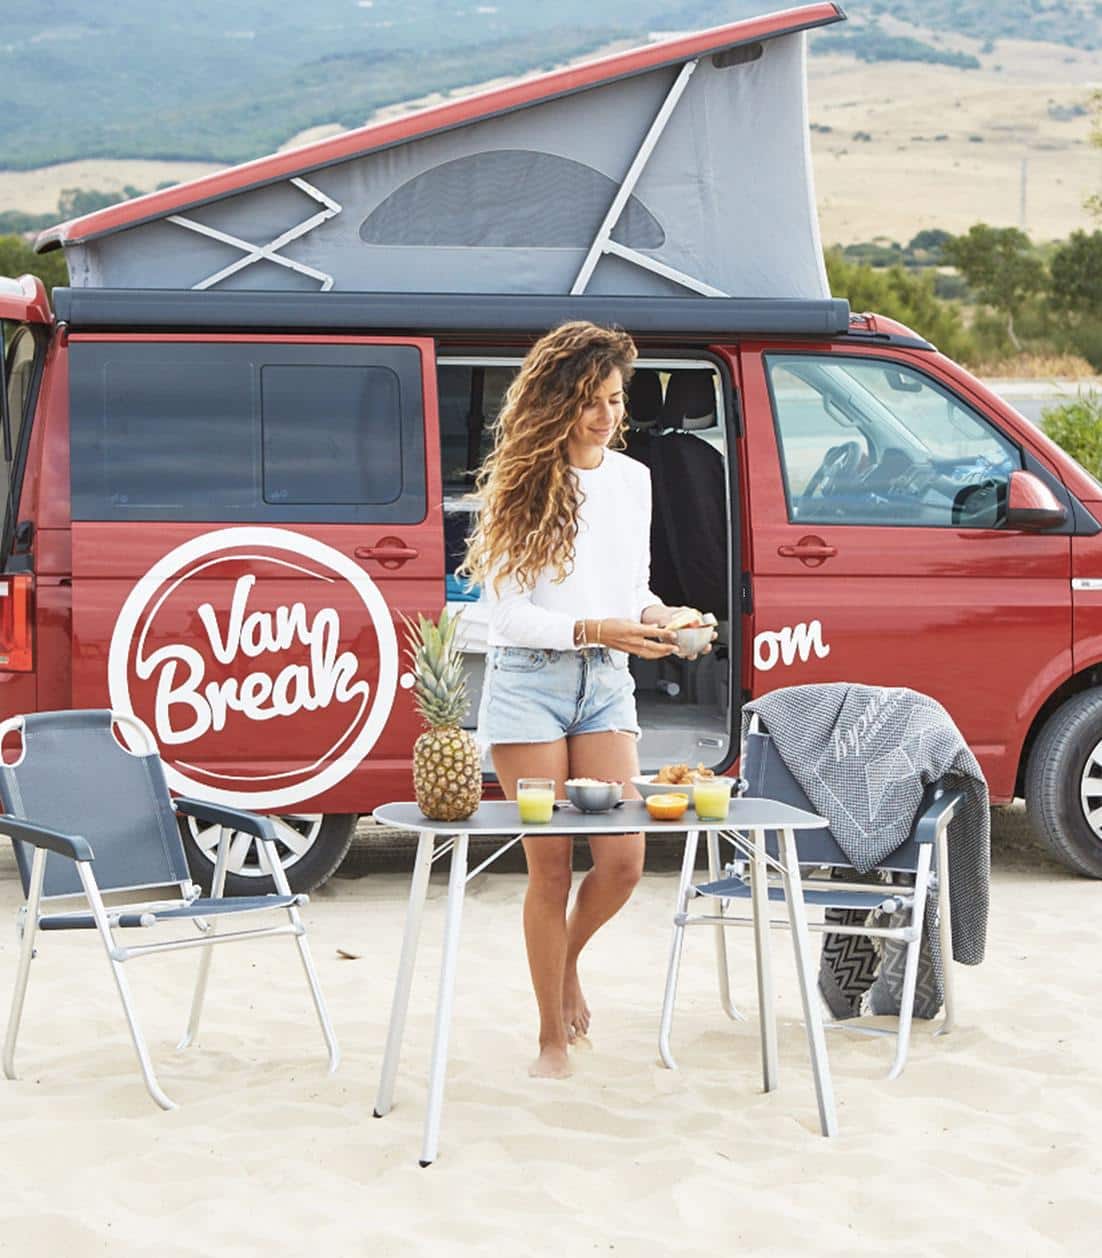 Curly haired woman setting up a table next to a red campervan VW